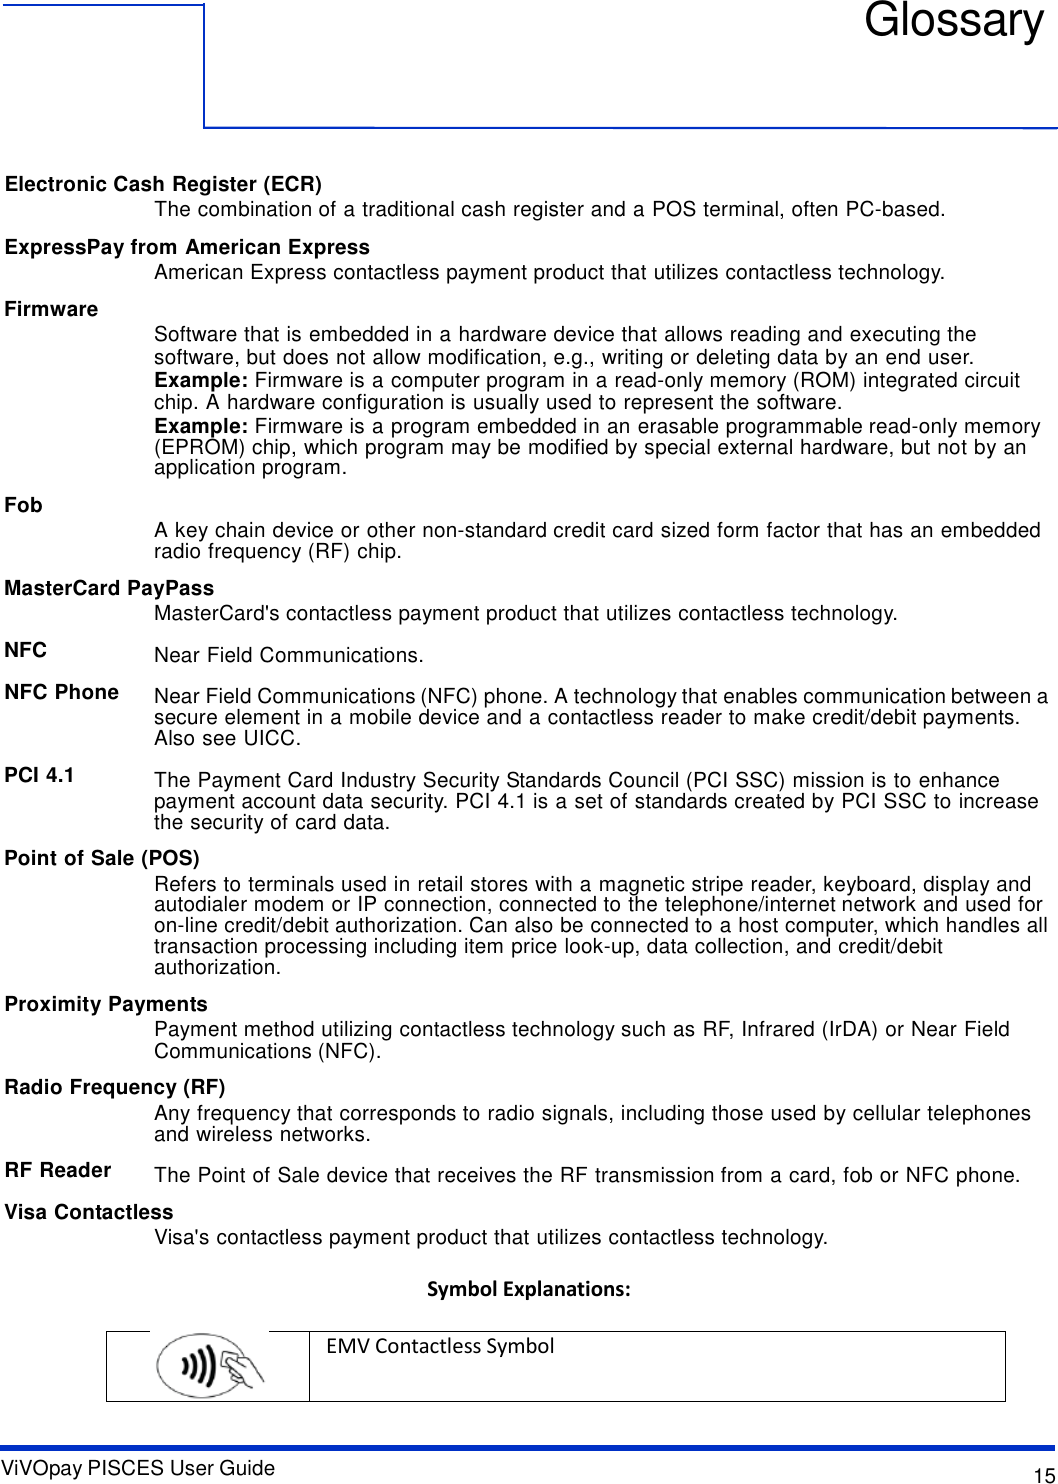 ViVOpay PISCES User Guide 15     Glossary       Electronic Cash Register (ECR) The combination of a traditional cash register and a POS terminal, often PC-based.  ExpressPay from American Express American Express contactless payment product that utilizes contactless technology.  Firmware         Fob   Software that is embedded in a hardware device that allows reading and executing the software, but does not allow modification, e.g., writing or deleting data by an end user. Example: Firmware is a computer program in a read-only memory (ROM) integrated circuit chip. A hardware configuration is usually used to represent the software. Example: Firmware is a program embedded in an erasable programmable read-only memory (EPROM) chip, which program may be modified by special external hardware, but not by an application program.   A key chain device or other non-standard credit card sized form factor that has an embedded radio frequency (RF) chip.  MasterCard PayPass MasterCard&apos;s contactless payment product that utilizes contactless technology.  NFC  NFC Phone    PCI 4.1  Near Field Communications.  Near Field Communications (NFC) phone. A technology that enables communication between a secure element in a mobile device and a contactless reader to make credit/debit payments. Also see UICC.  The Payment Card Industry Security Standards Council (PCI SSC) mission is to enhance payment account data security. PCI 4.1 is a set of standards created by PCI SSC to increase the security of card data.  Point of Sale (POS) Refers to terminals used in retail stores with a magnetic stripe reader, keyboard, display and autodialer modem or IP connection, connected to the telephone/internet network and used for on-line credit/debit authorization. Can also be connected to a host computer, which handles all transaction processing including item price look-up, data collection, and credit/debit authorization.  Proximity Payments Payment method utilizing contactless technology such as RF, Infrared (IrDA) or Near Field Communications (NFC).  Radio Frequency (RF) Any frequency that corresponds to radio signals, including those used by cellular telephones and wireless networks.  RF Reader  The Point of Sale device that receives the RF transmission from a card, fob or NFC phone.  Visa Contactless Visa&apos;s contactless payment product that utilizes contactless technology.  Symbol Explanations:    EMV Contactless Symbol  